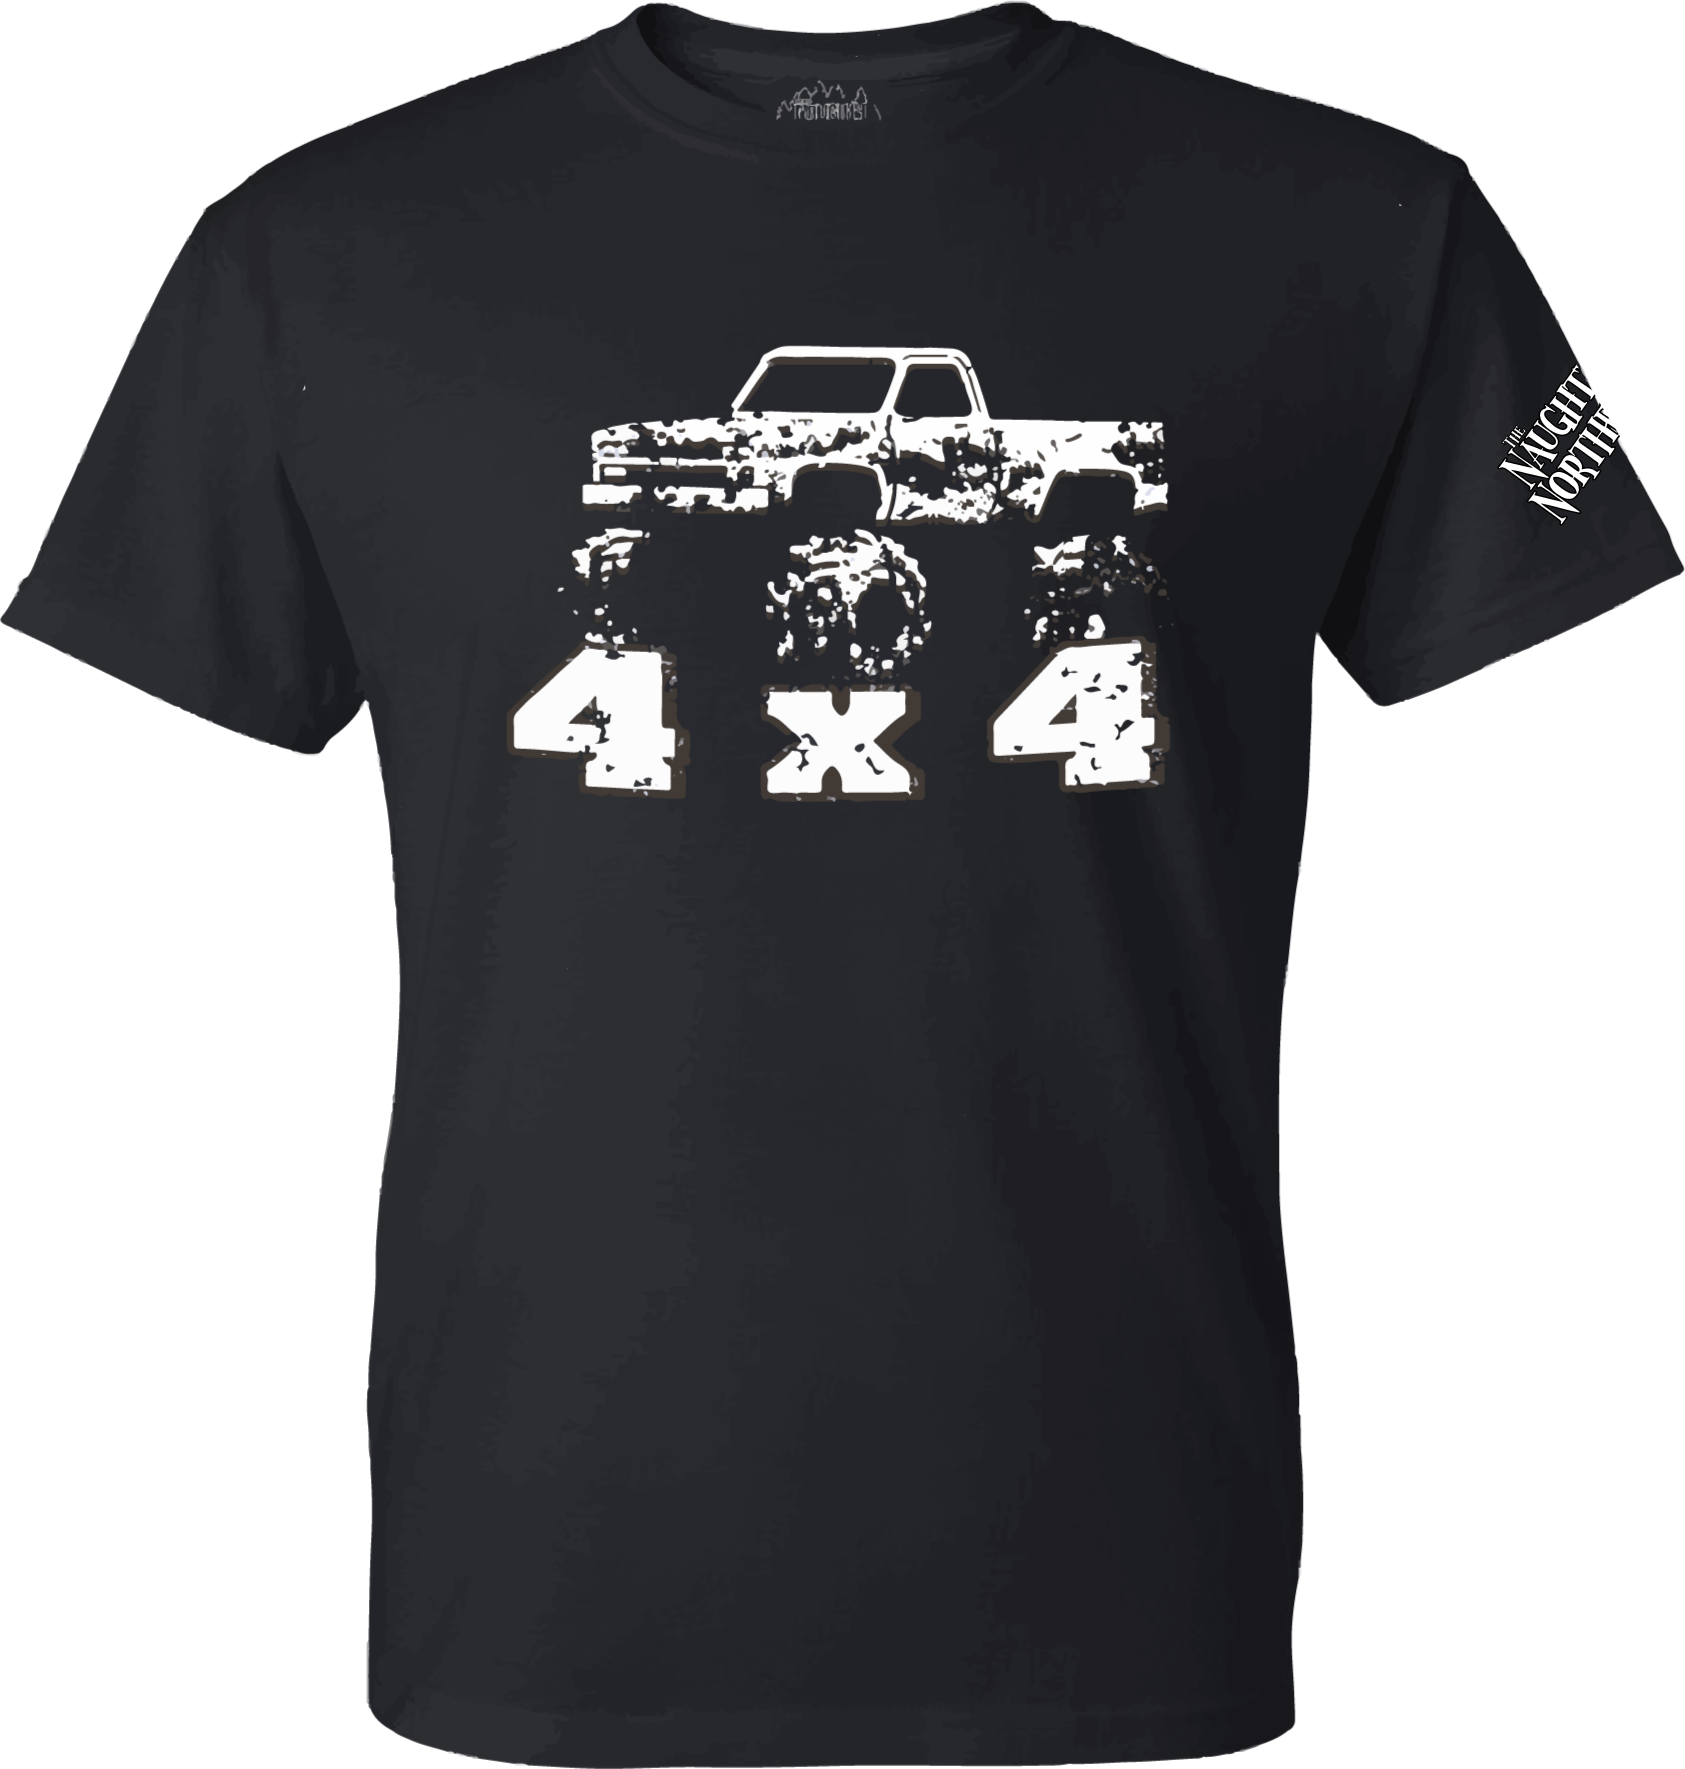 T-Shirt : 4x4 Truck with Hillbilly Good Time - Multiple Colors